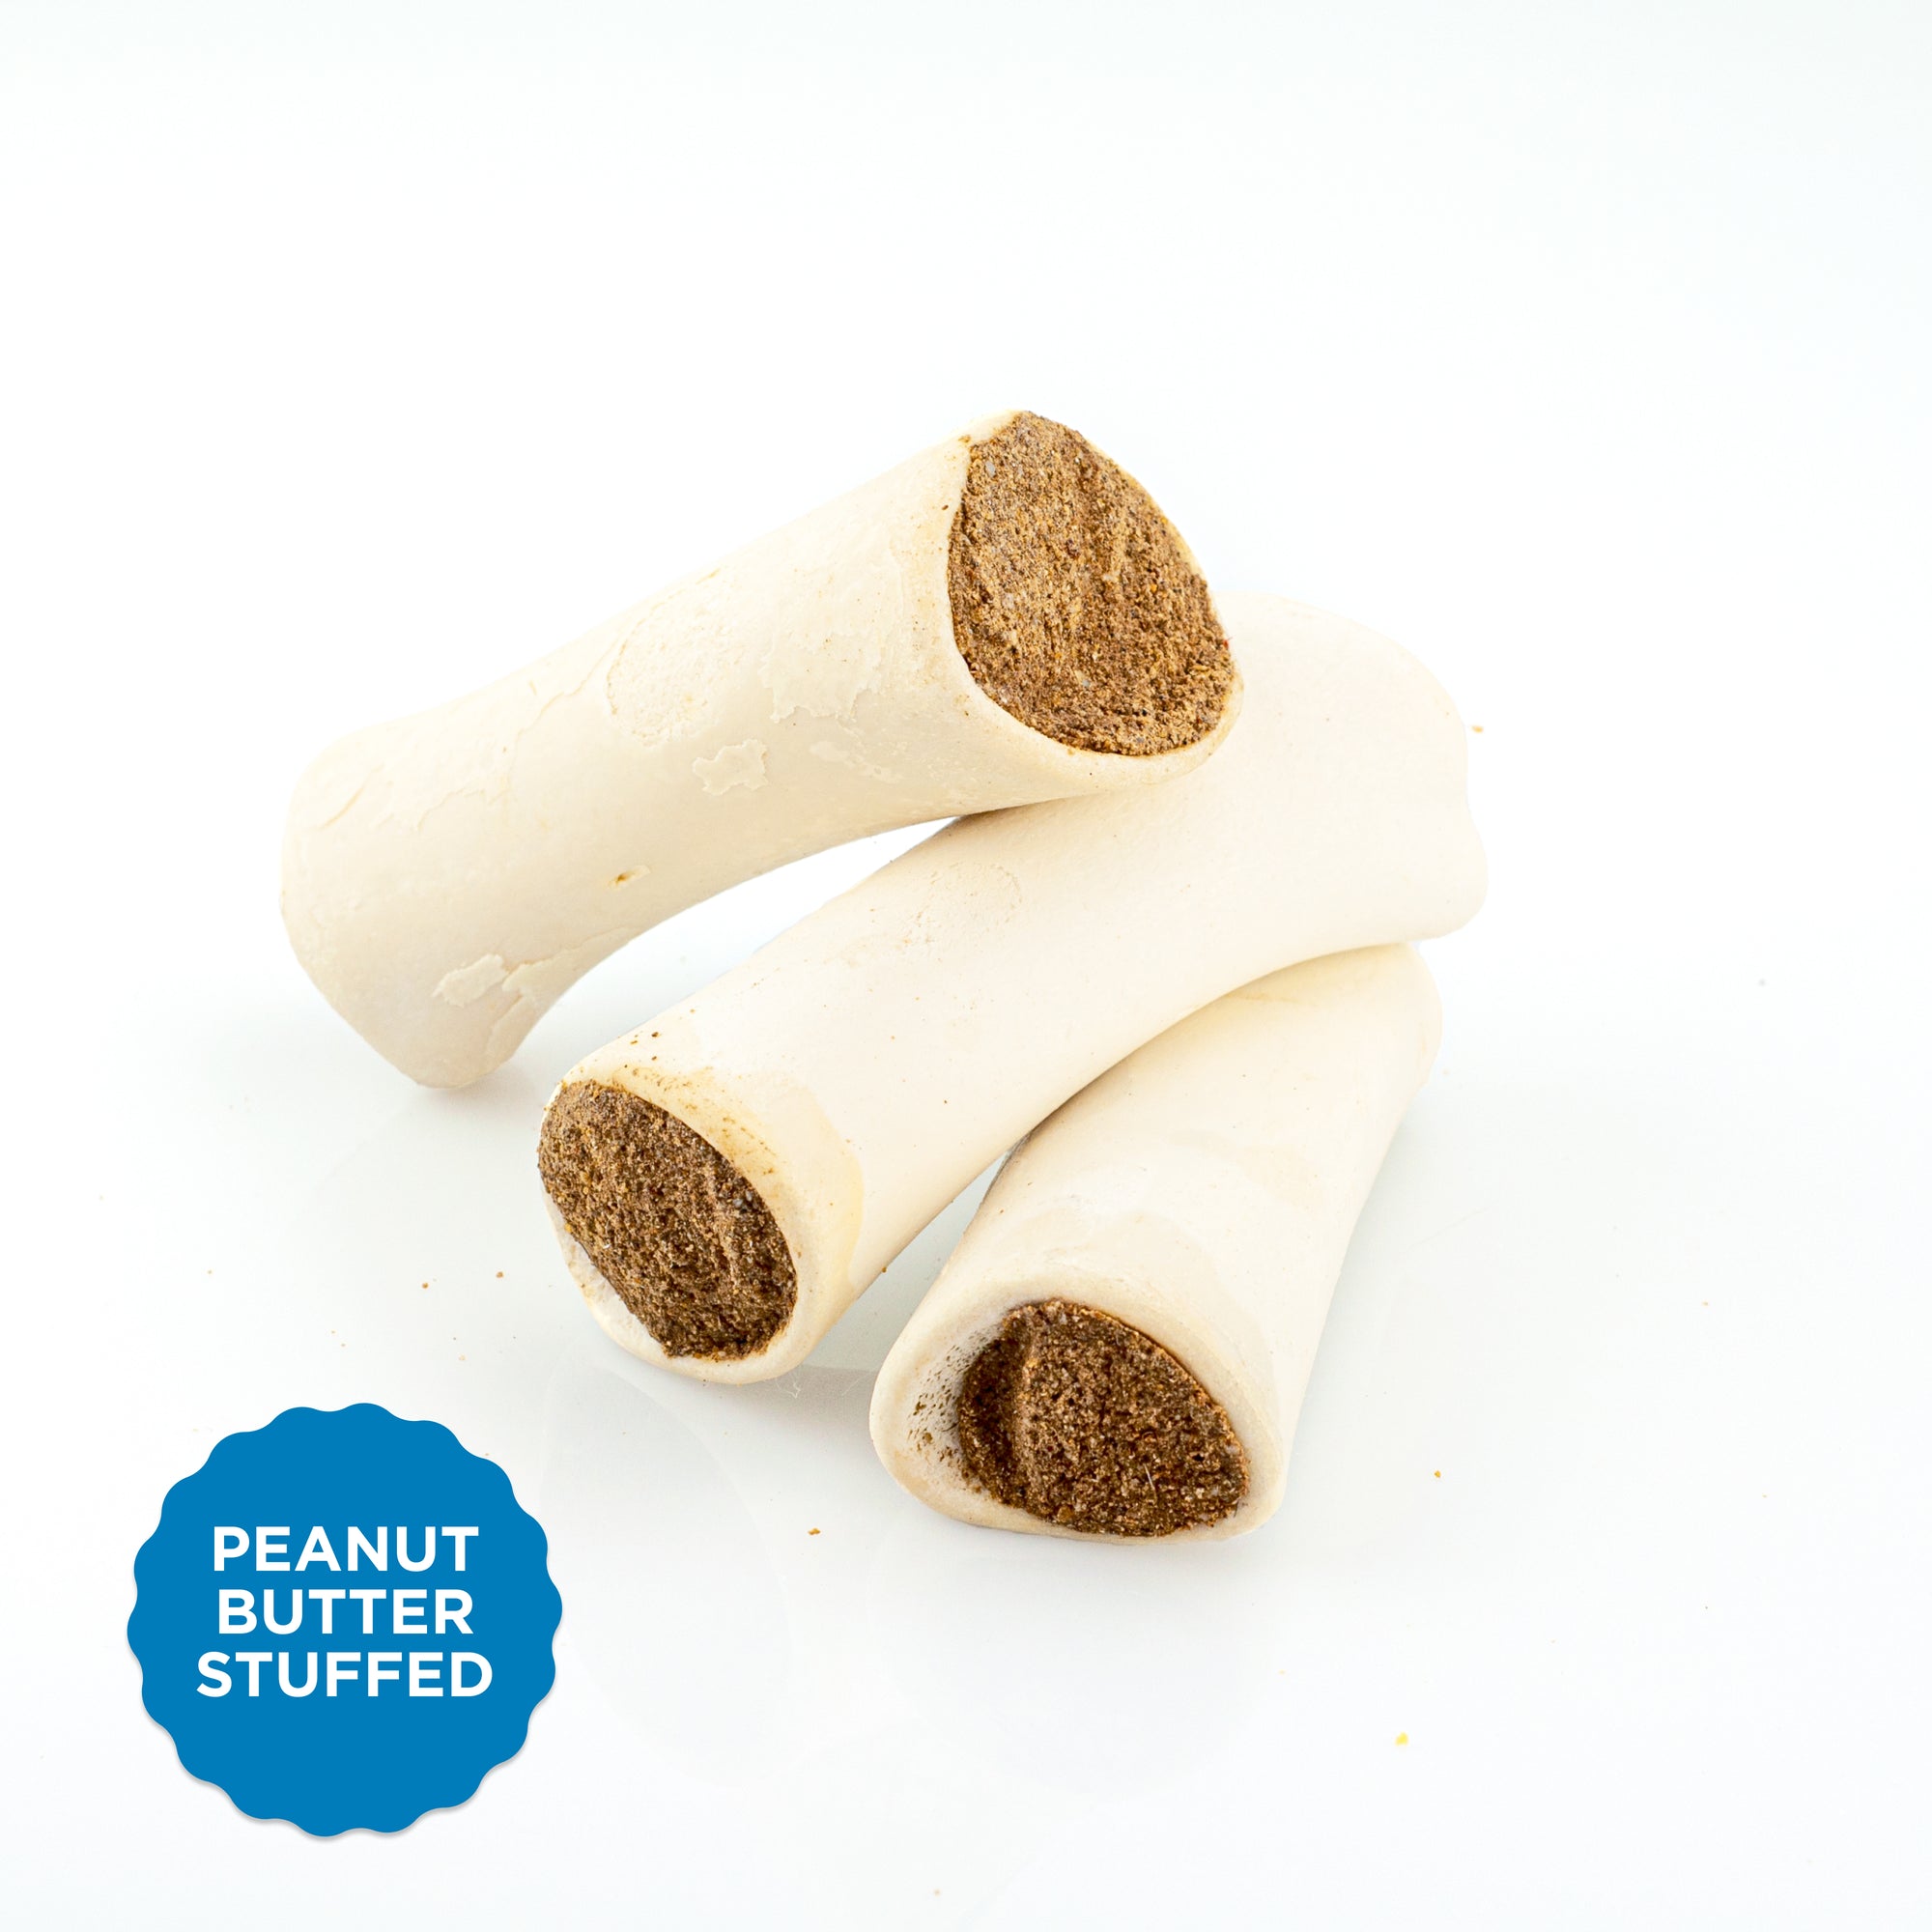 Three Peanut Butter Stuffed Shin Bones (3 Pack) by Best Bully Sticks on a white background.